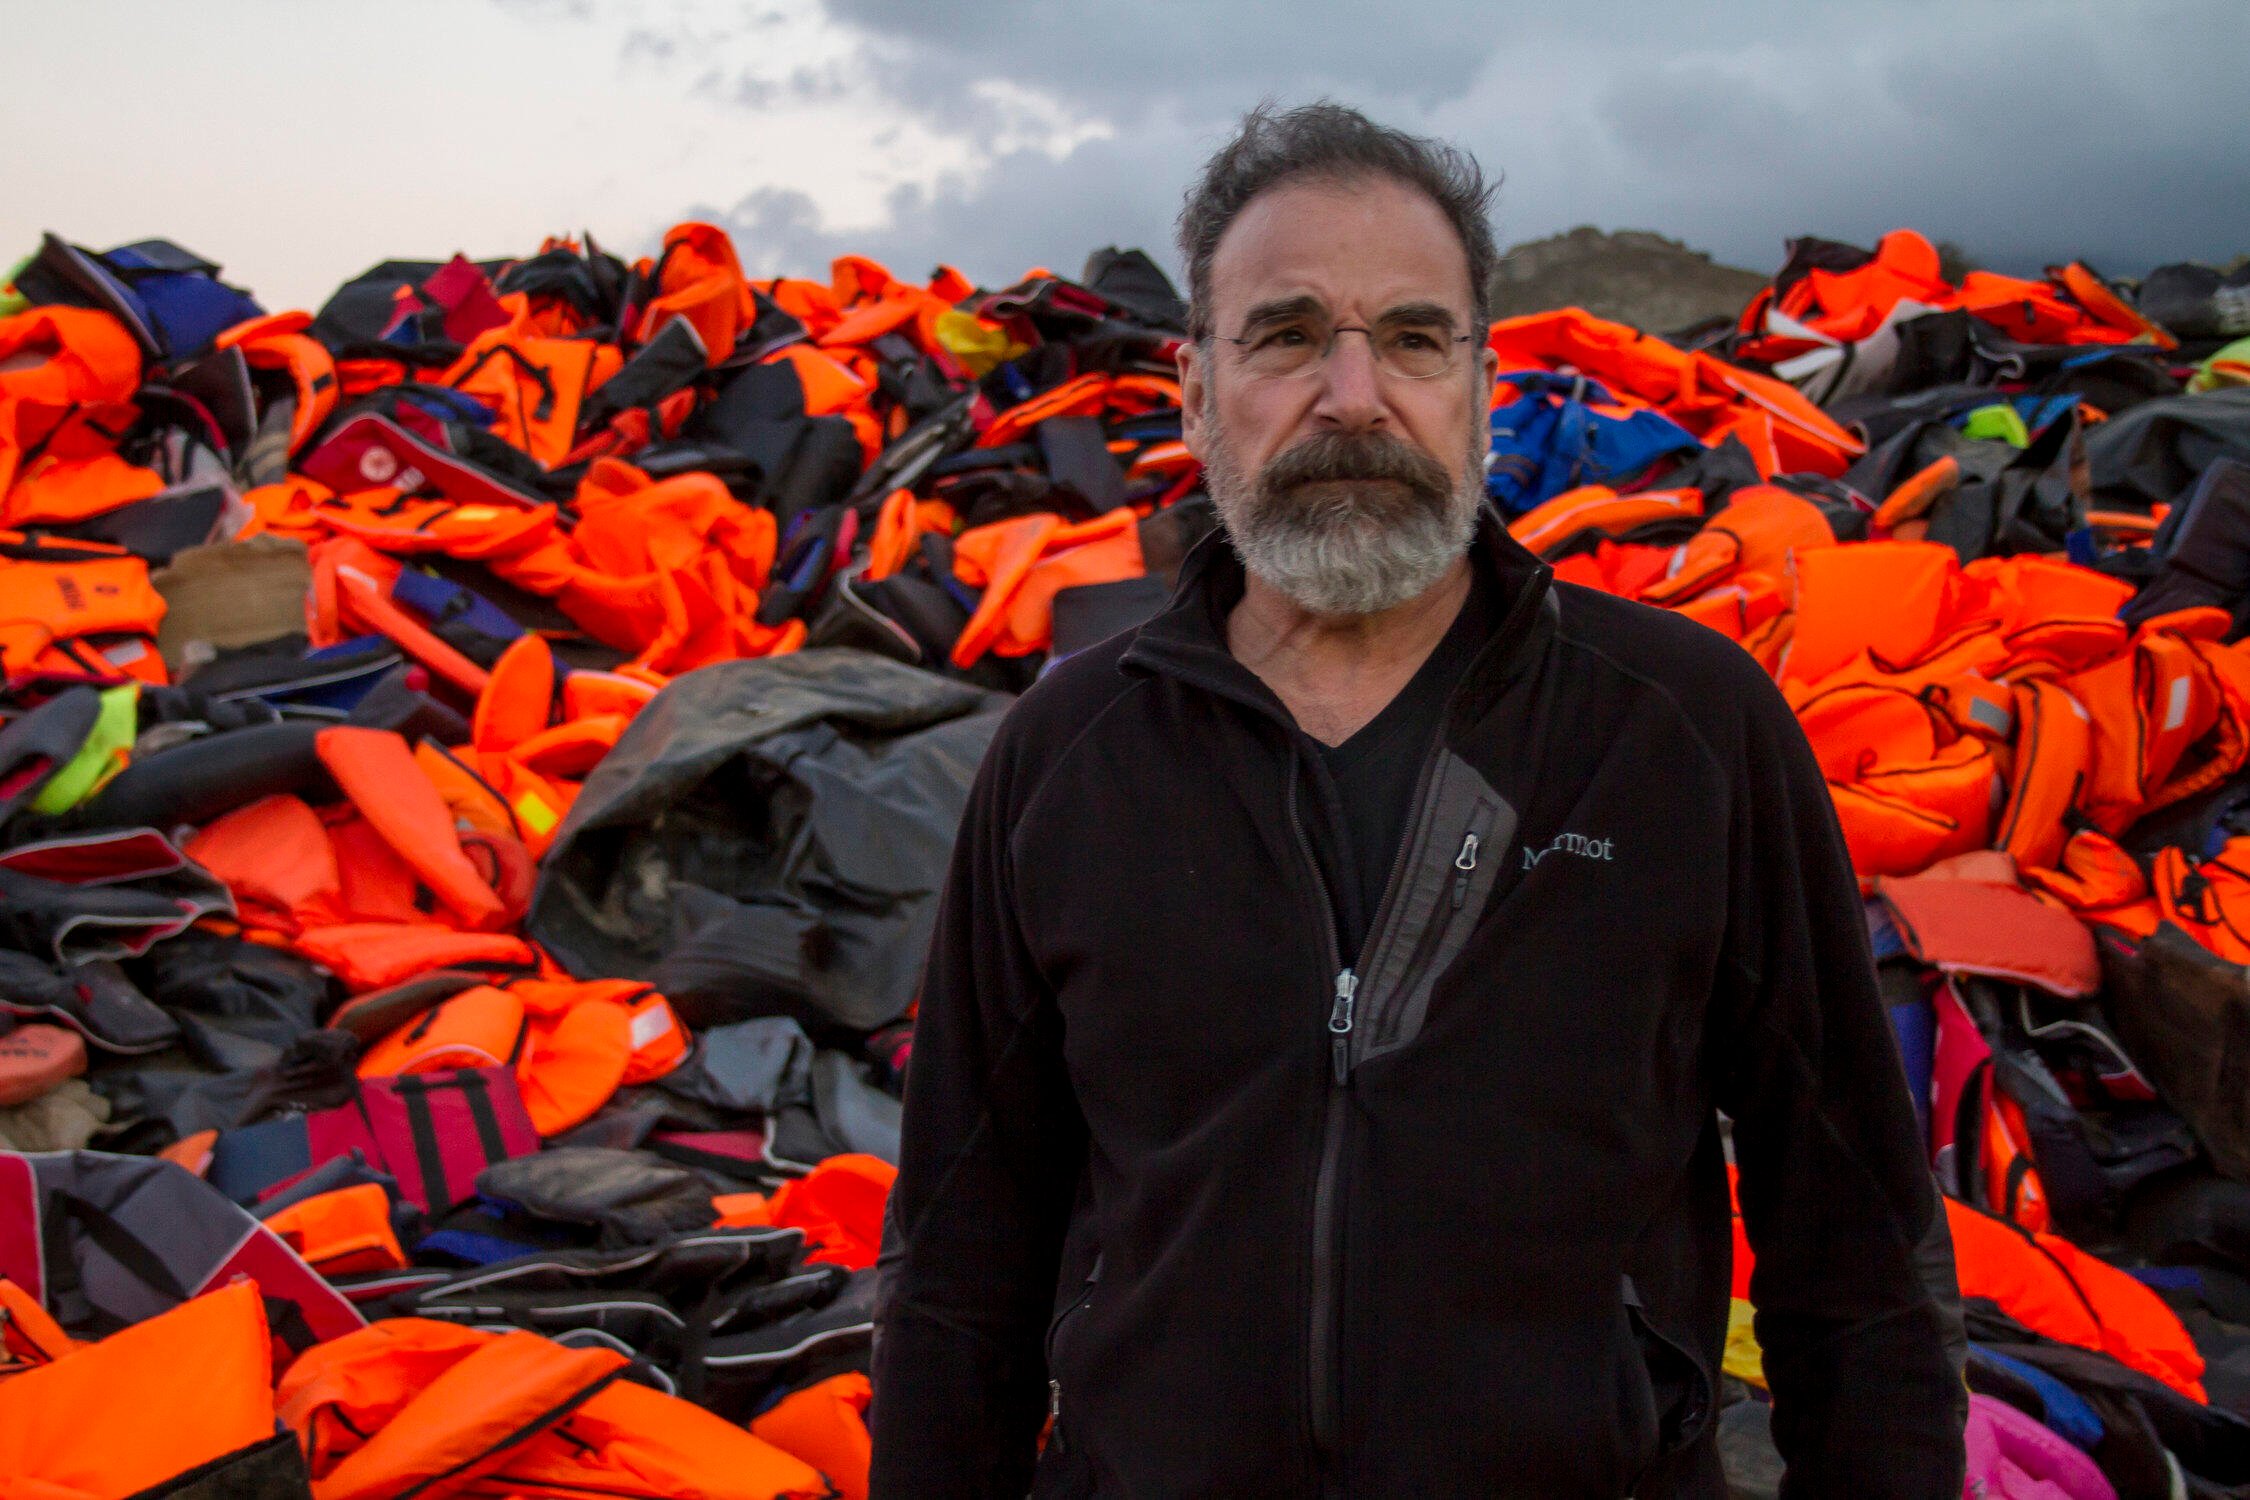 Mandy Patinkin on the island of Lesbos, Greece with lifejackets used by refugee